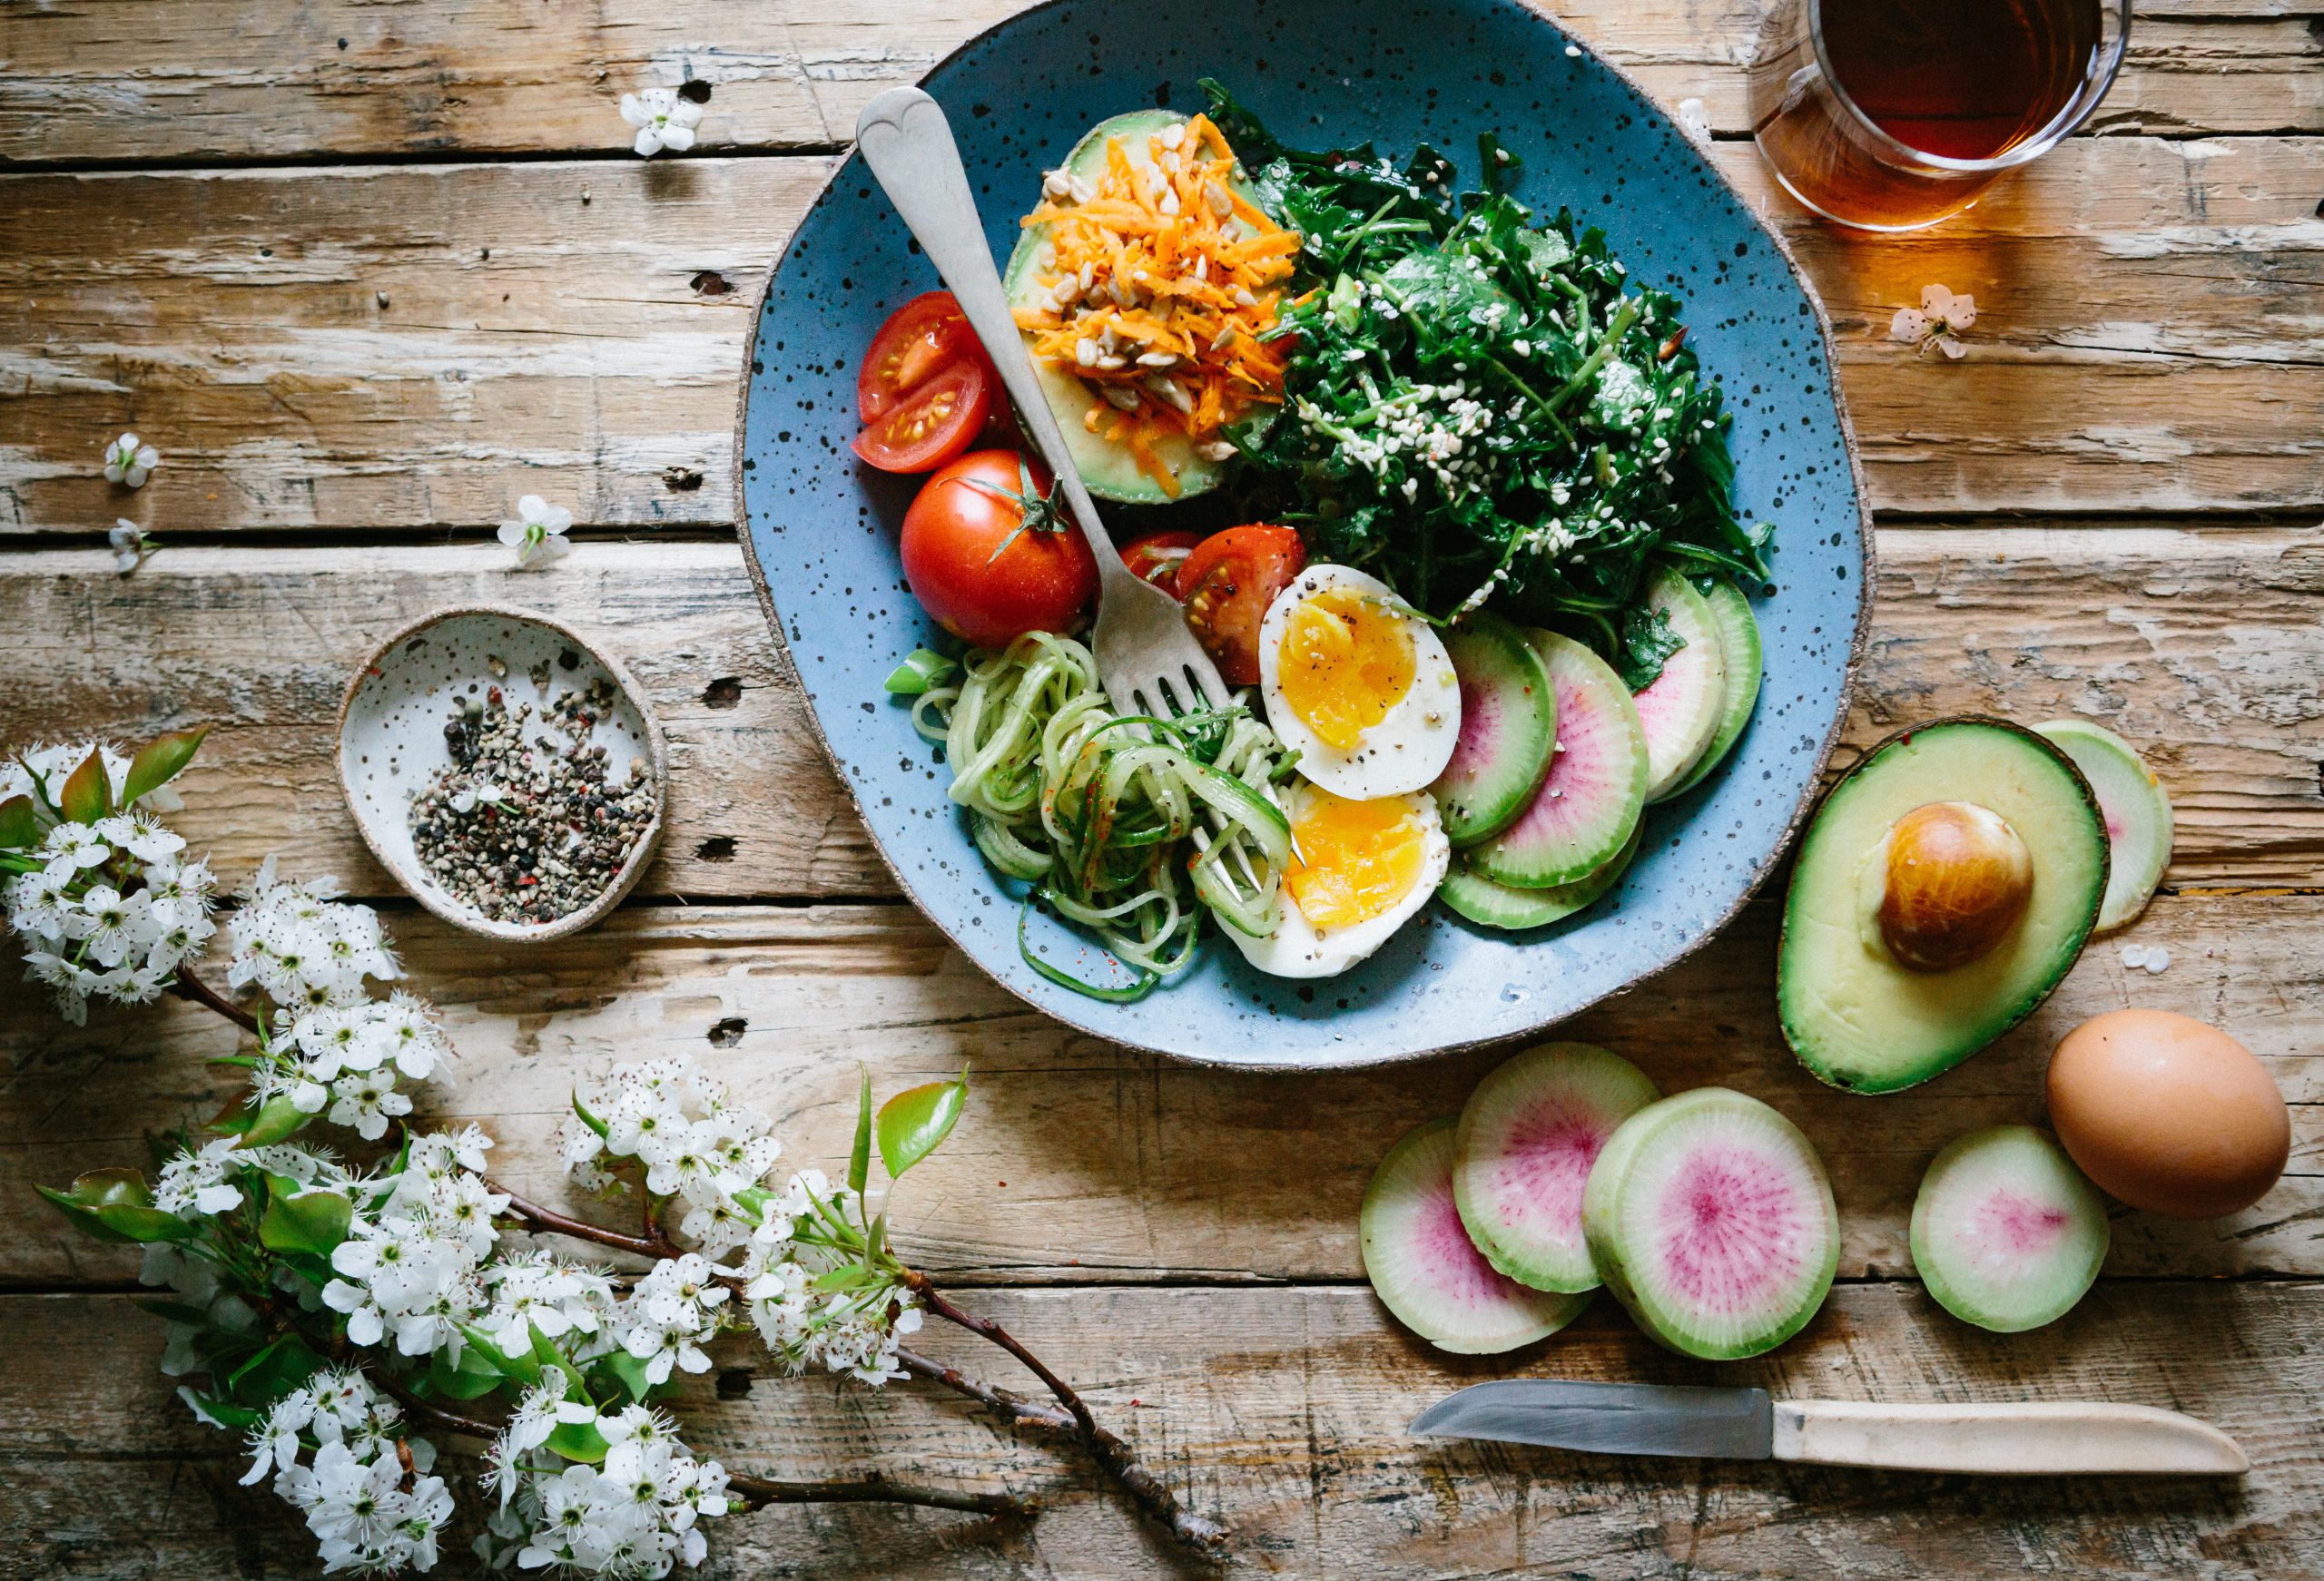 Plate with food - Why You Need To Boost Your Magnesium Intake In Midlife